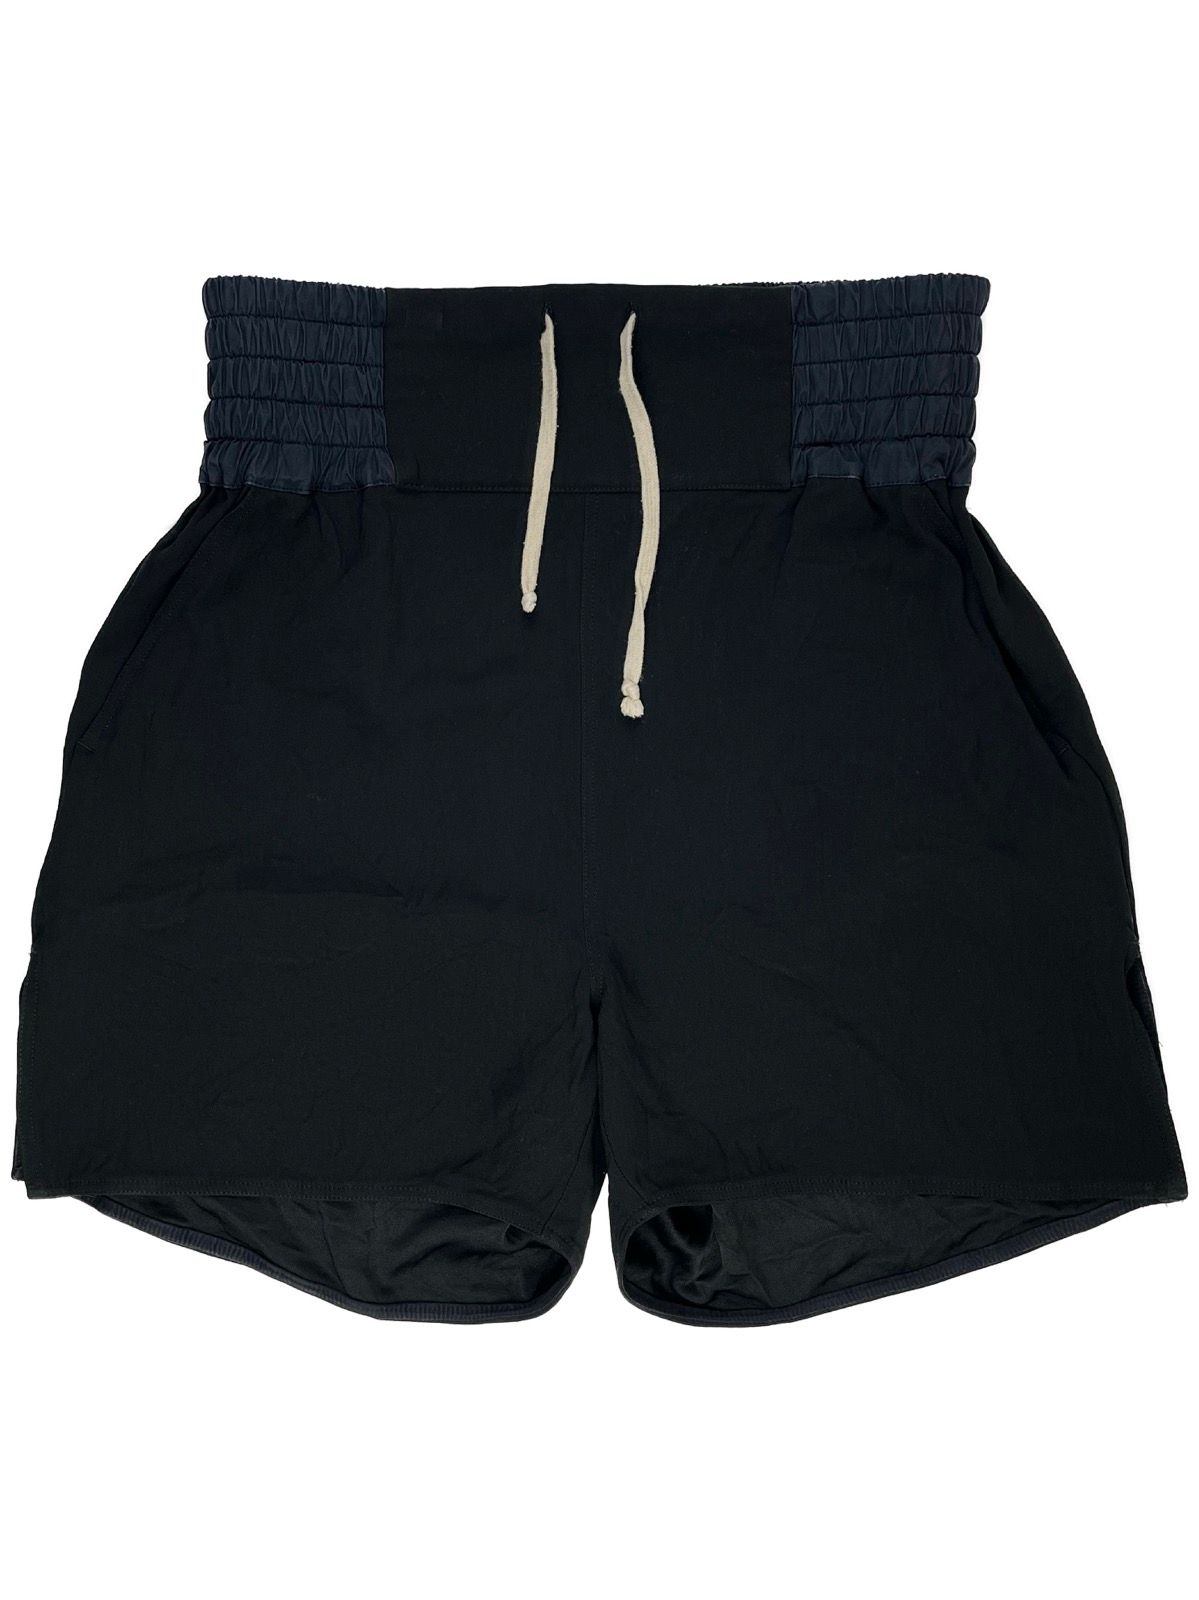 Pre-owned Rick Owens Fw14  Moody Boxer Shorts Mainline In Black